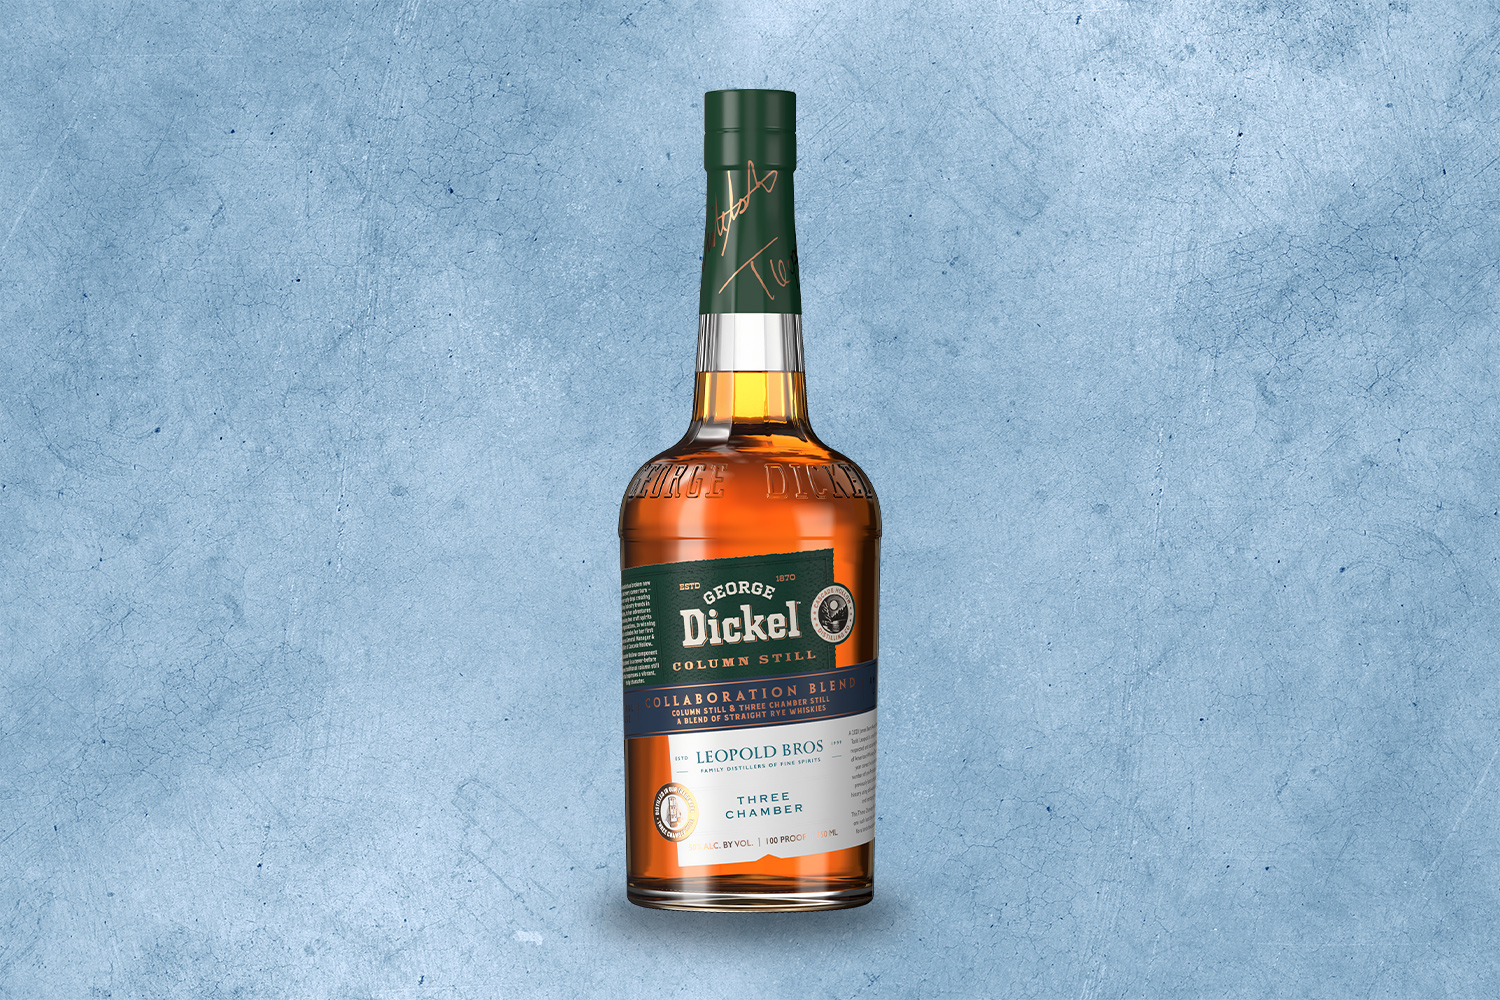 George Dickel x Leopold Bros. Collaboration Blend